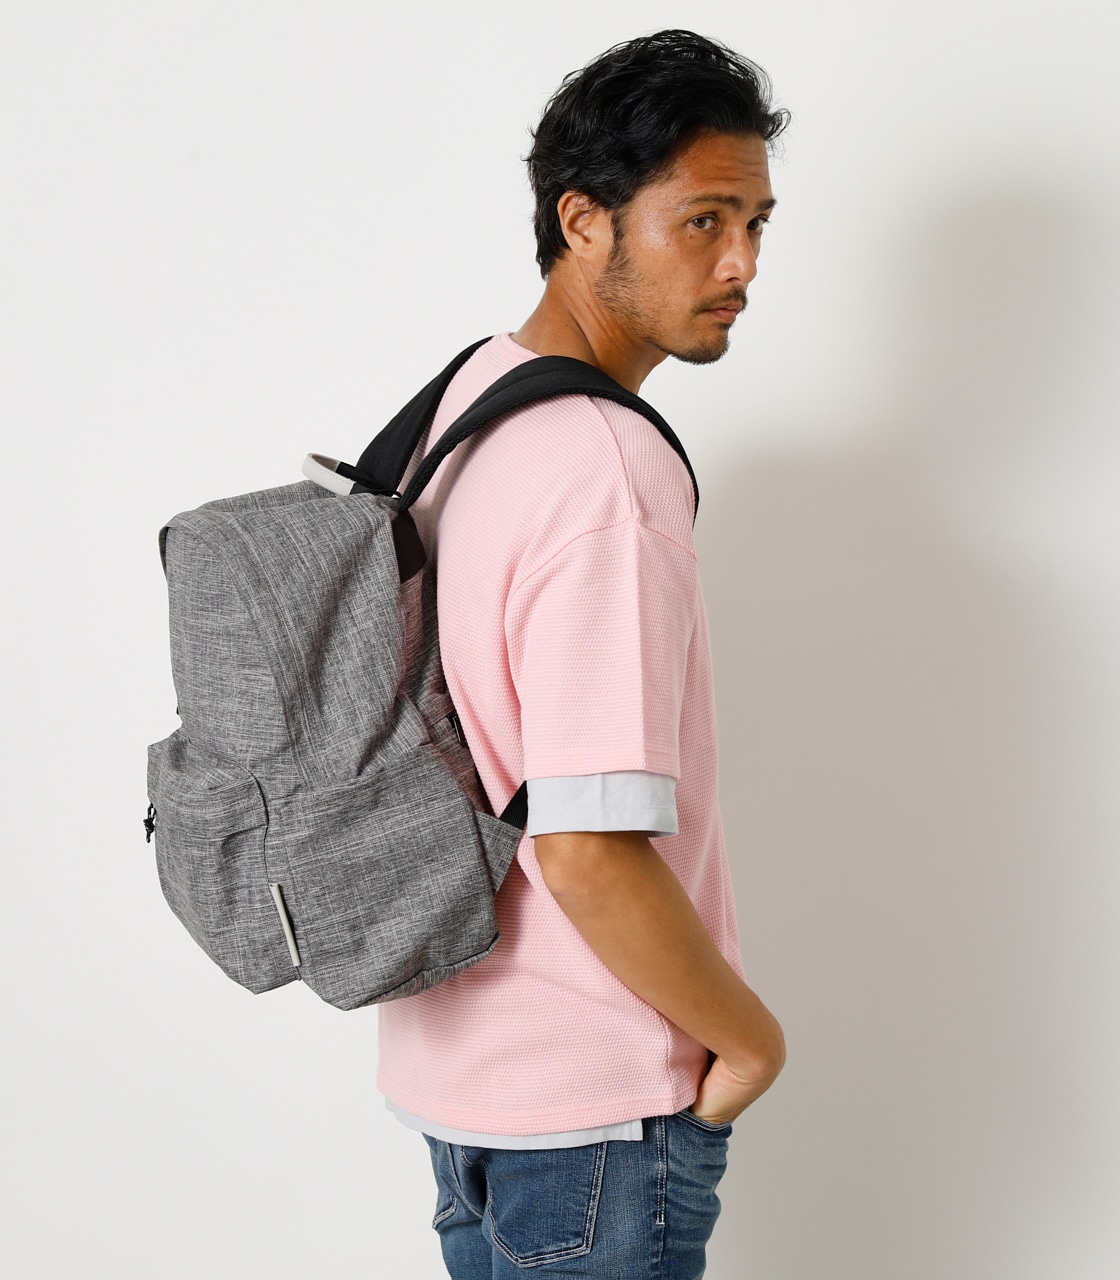 TOP SIDER×AZUL BACKPACK/TOP SIDER×AZULバックパック 詳細画像 L/GRY 11